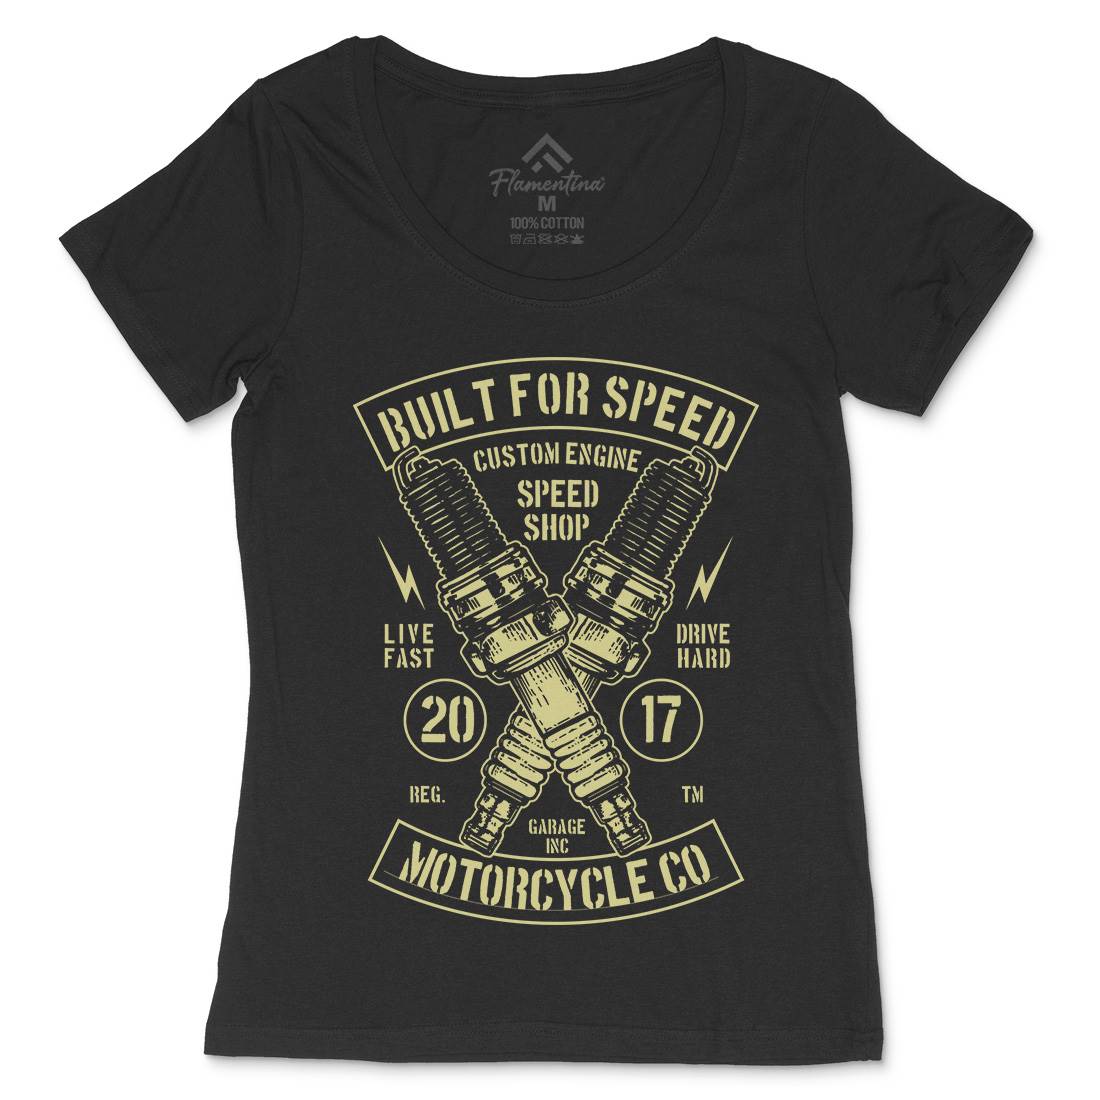 Built For Speed Womens Scoop Neck T-Shirt Motorcycles B188